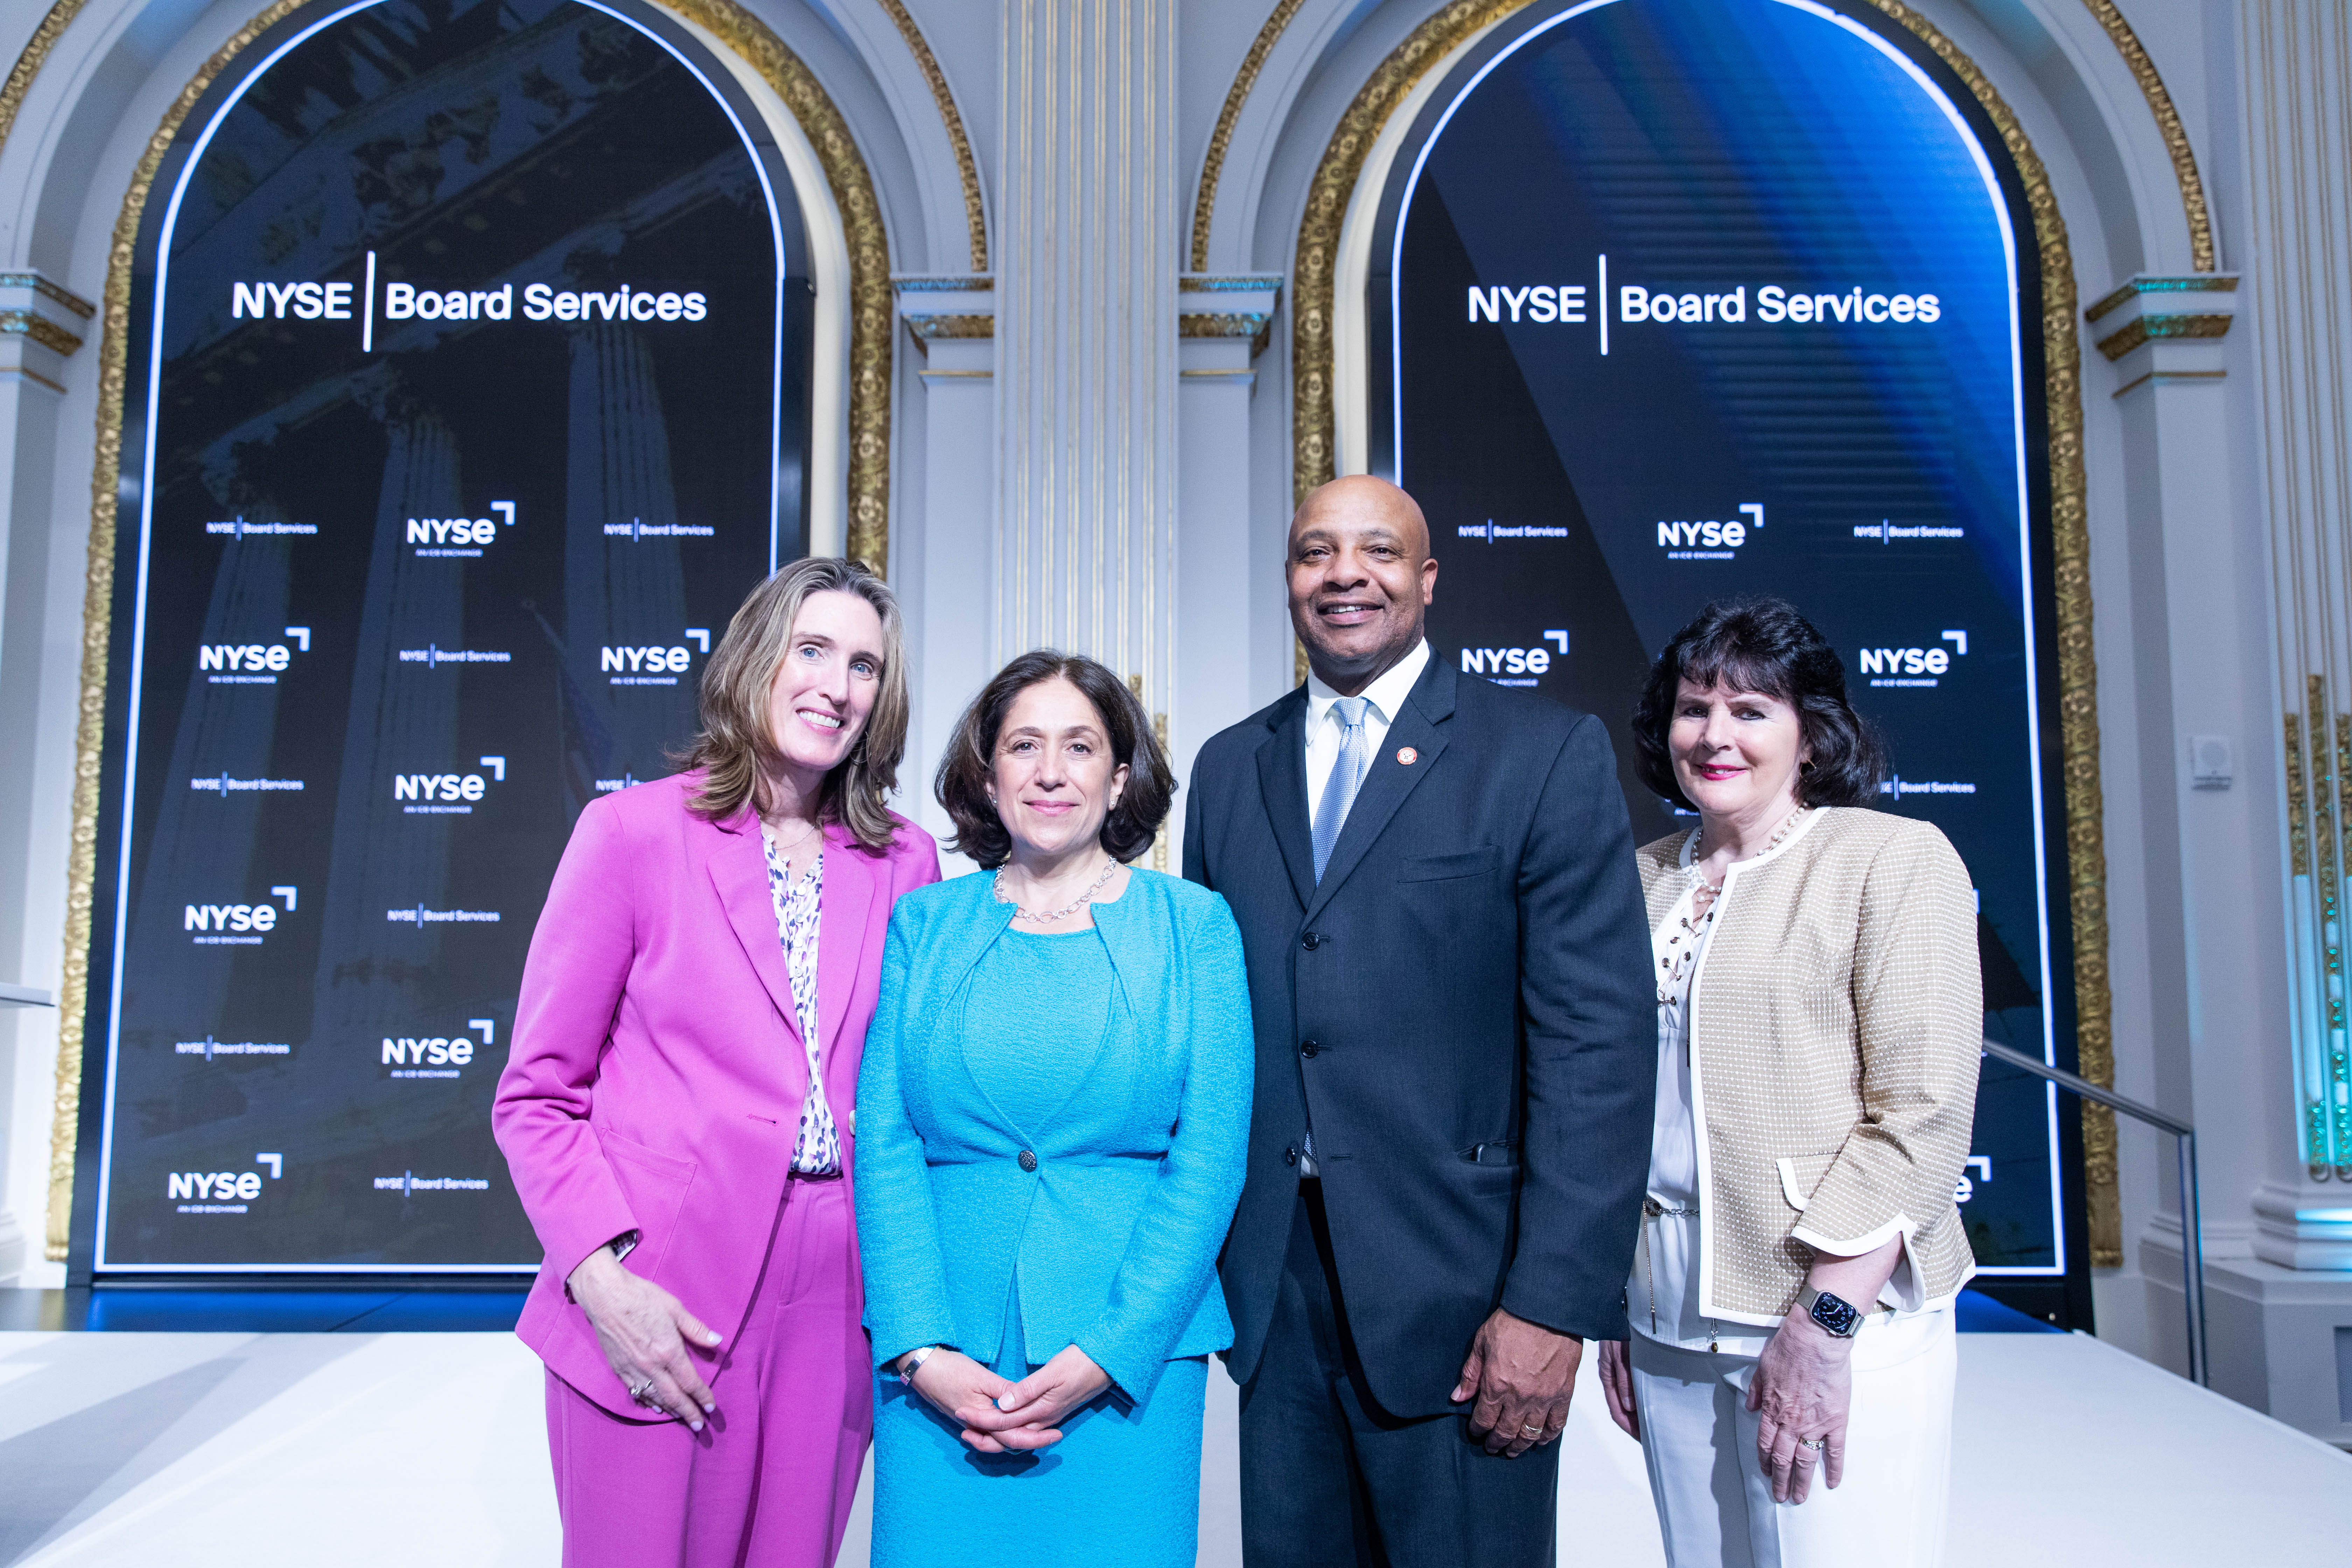 Suzanne Brown, Lucie Claire Vincent, Curtis Stephens, and Ursuline Foley at the NYSE Board Services 5th Anniversary Celebration